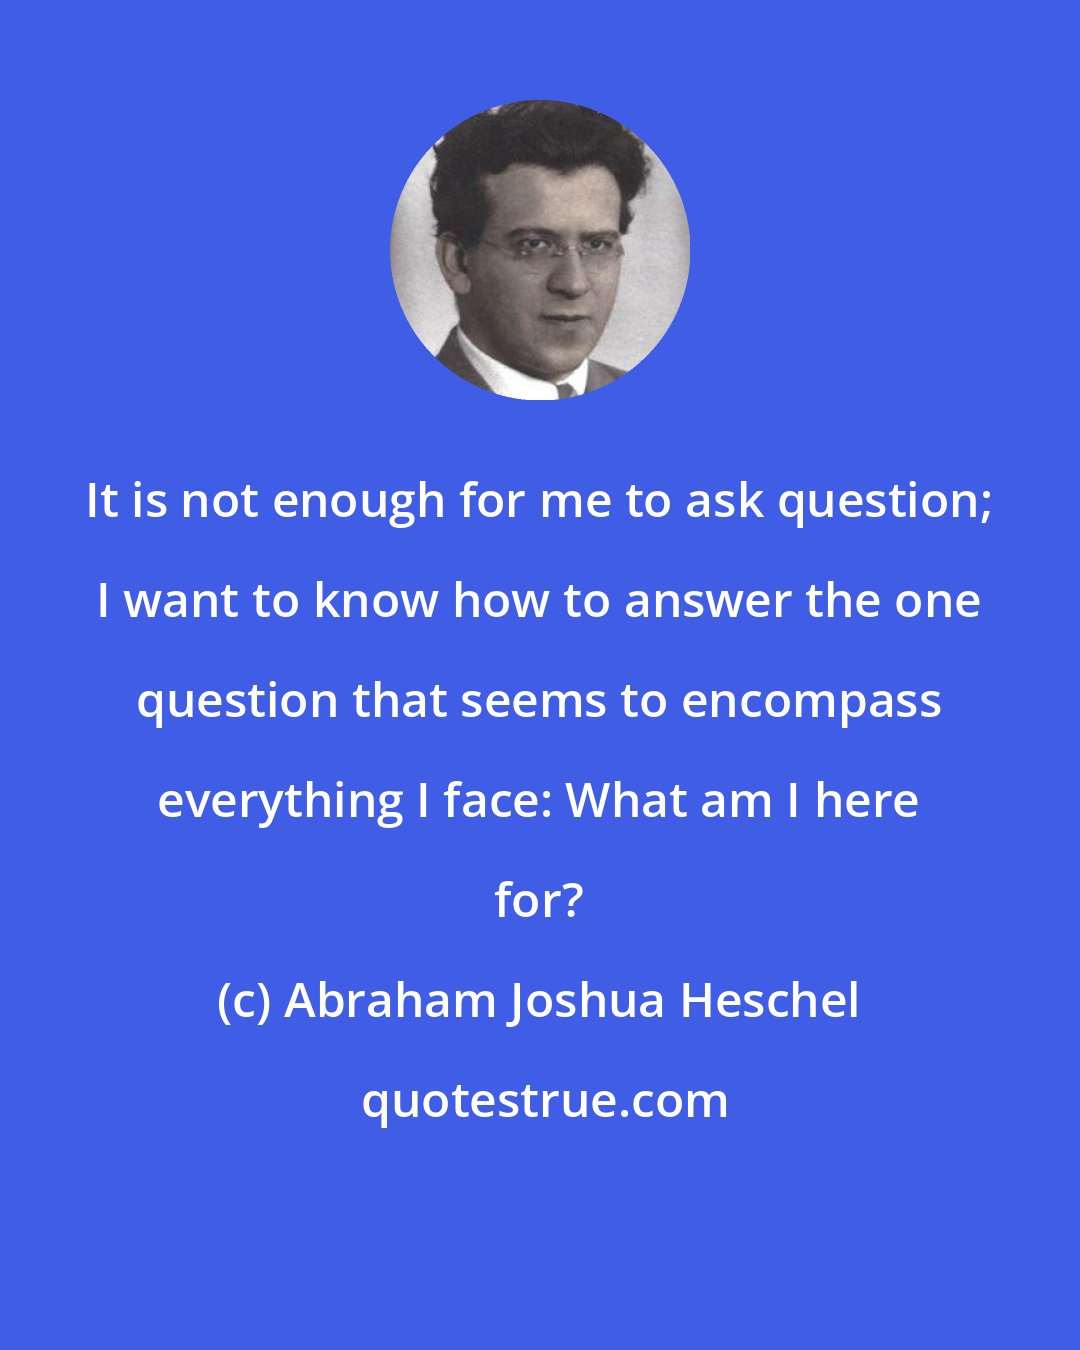 Abraham Joshua Heschel: It is not enough for me to ask question; I want to know how to answer the one question that seems to encompass everything I face: What am I here for?